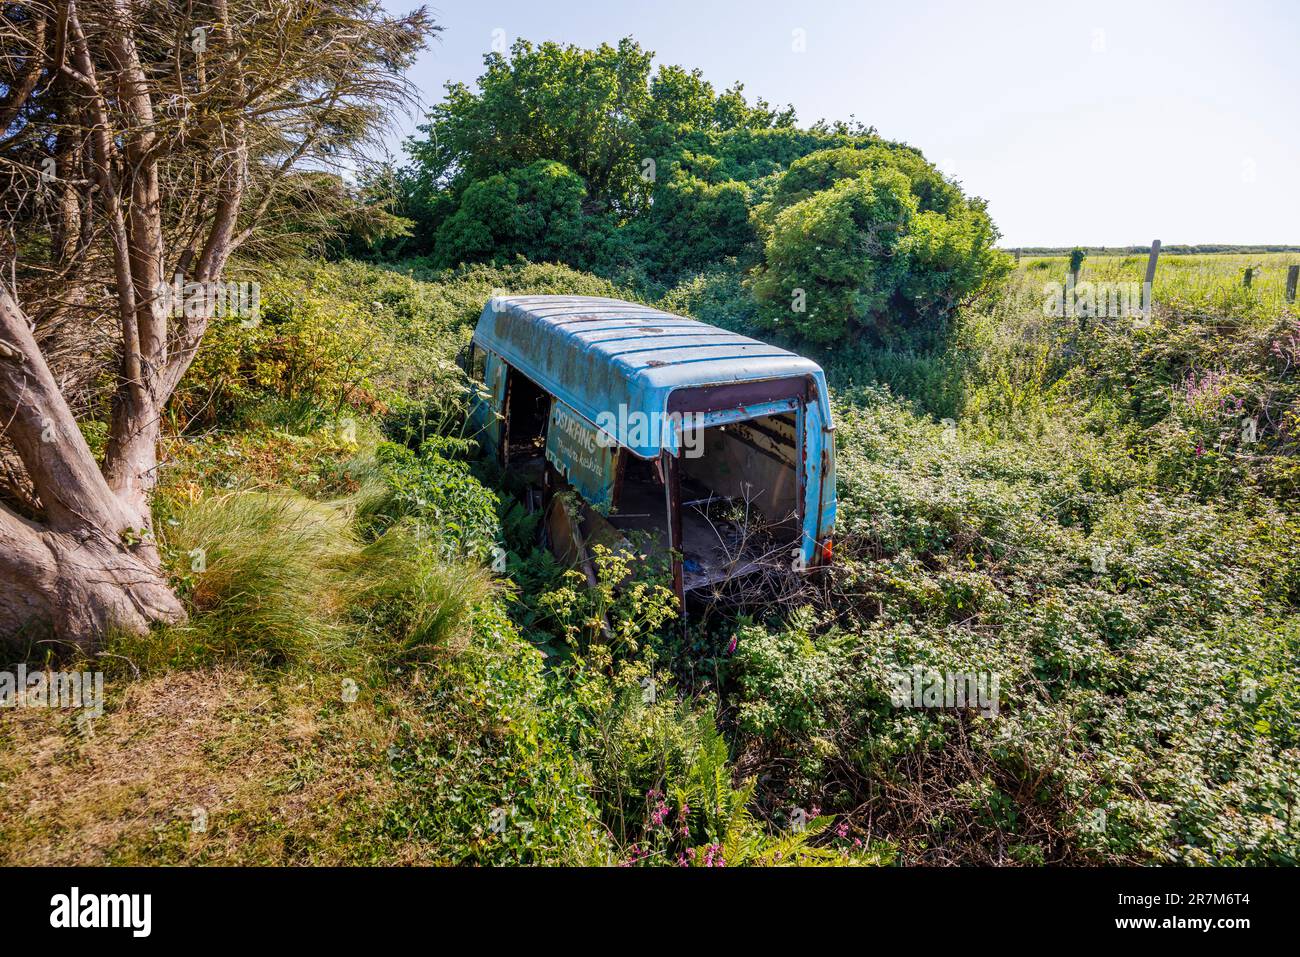 An overgrown, abandoned, disintegrating, blue van dumped in Marloes, a small village near the Pembrokeshire coast in south-west Wales, UK Stock Photo